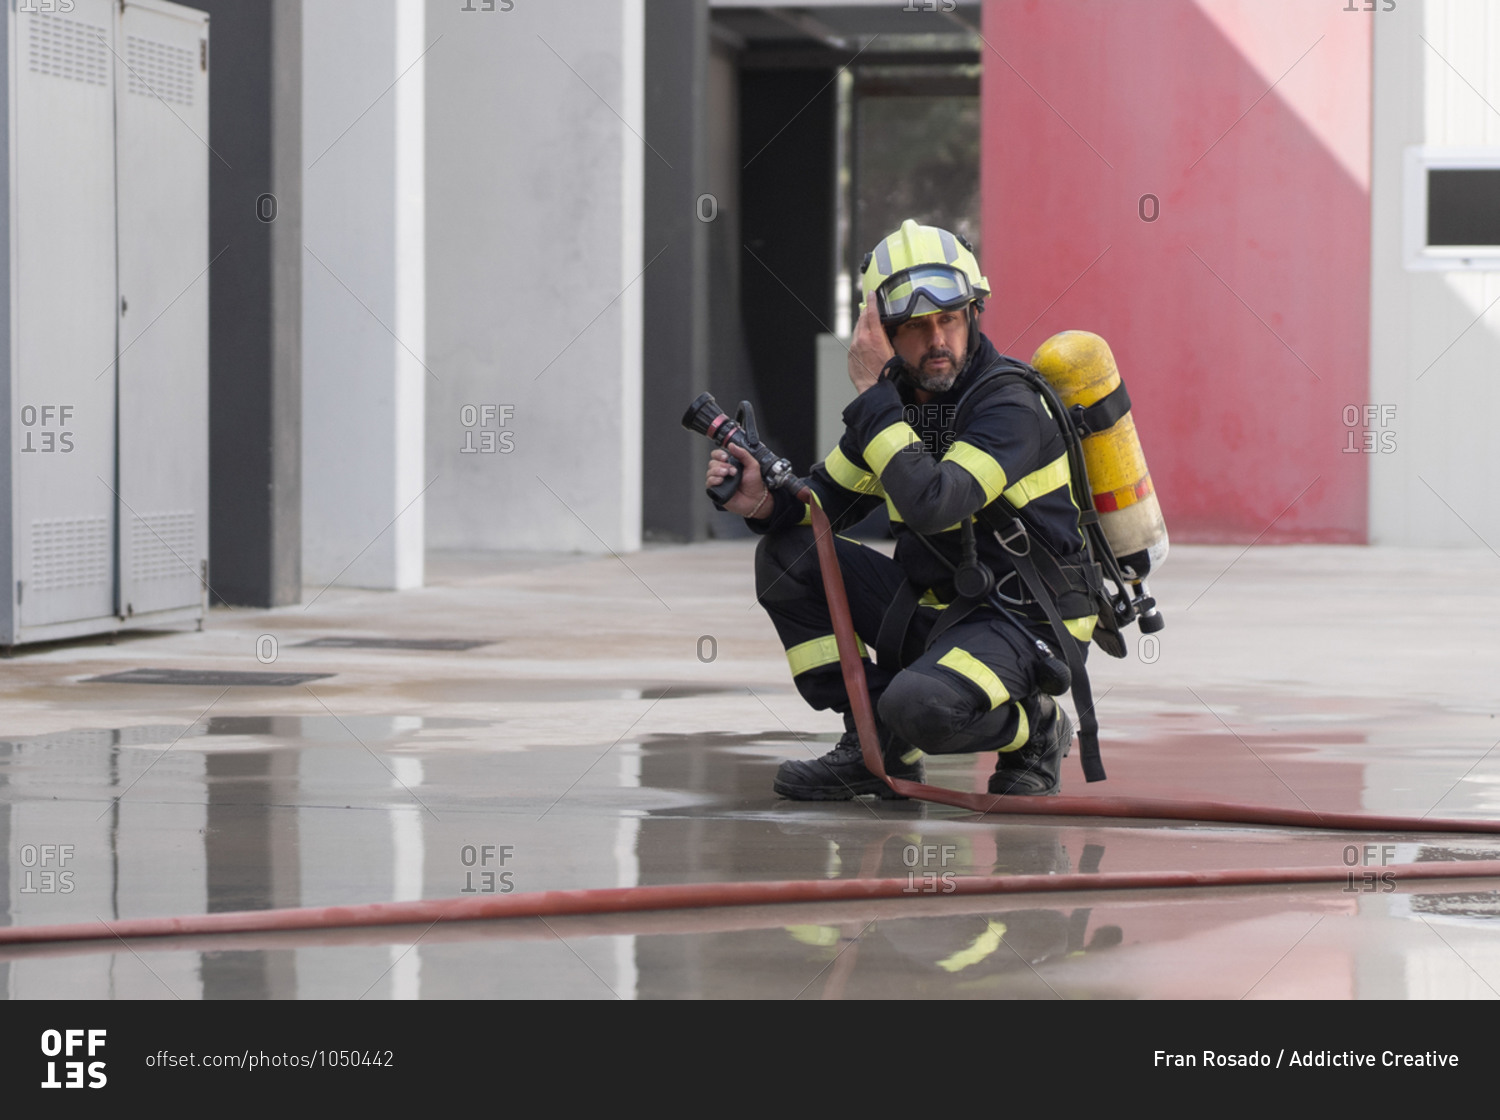 Contemplative unshaven firefighter in uniform with stripes and protective helmet reflecting in cement surface near hose at work while looking away